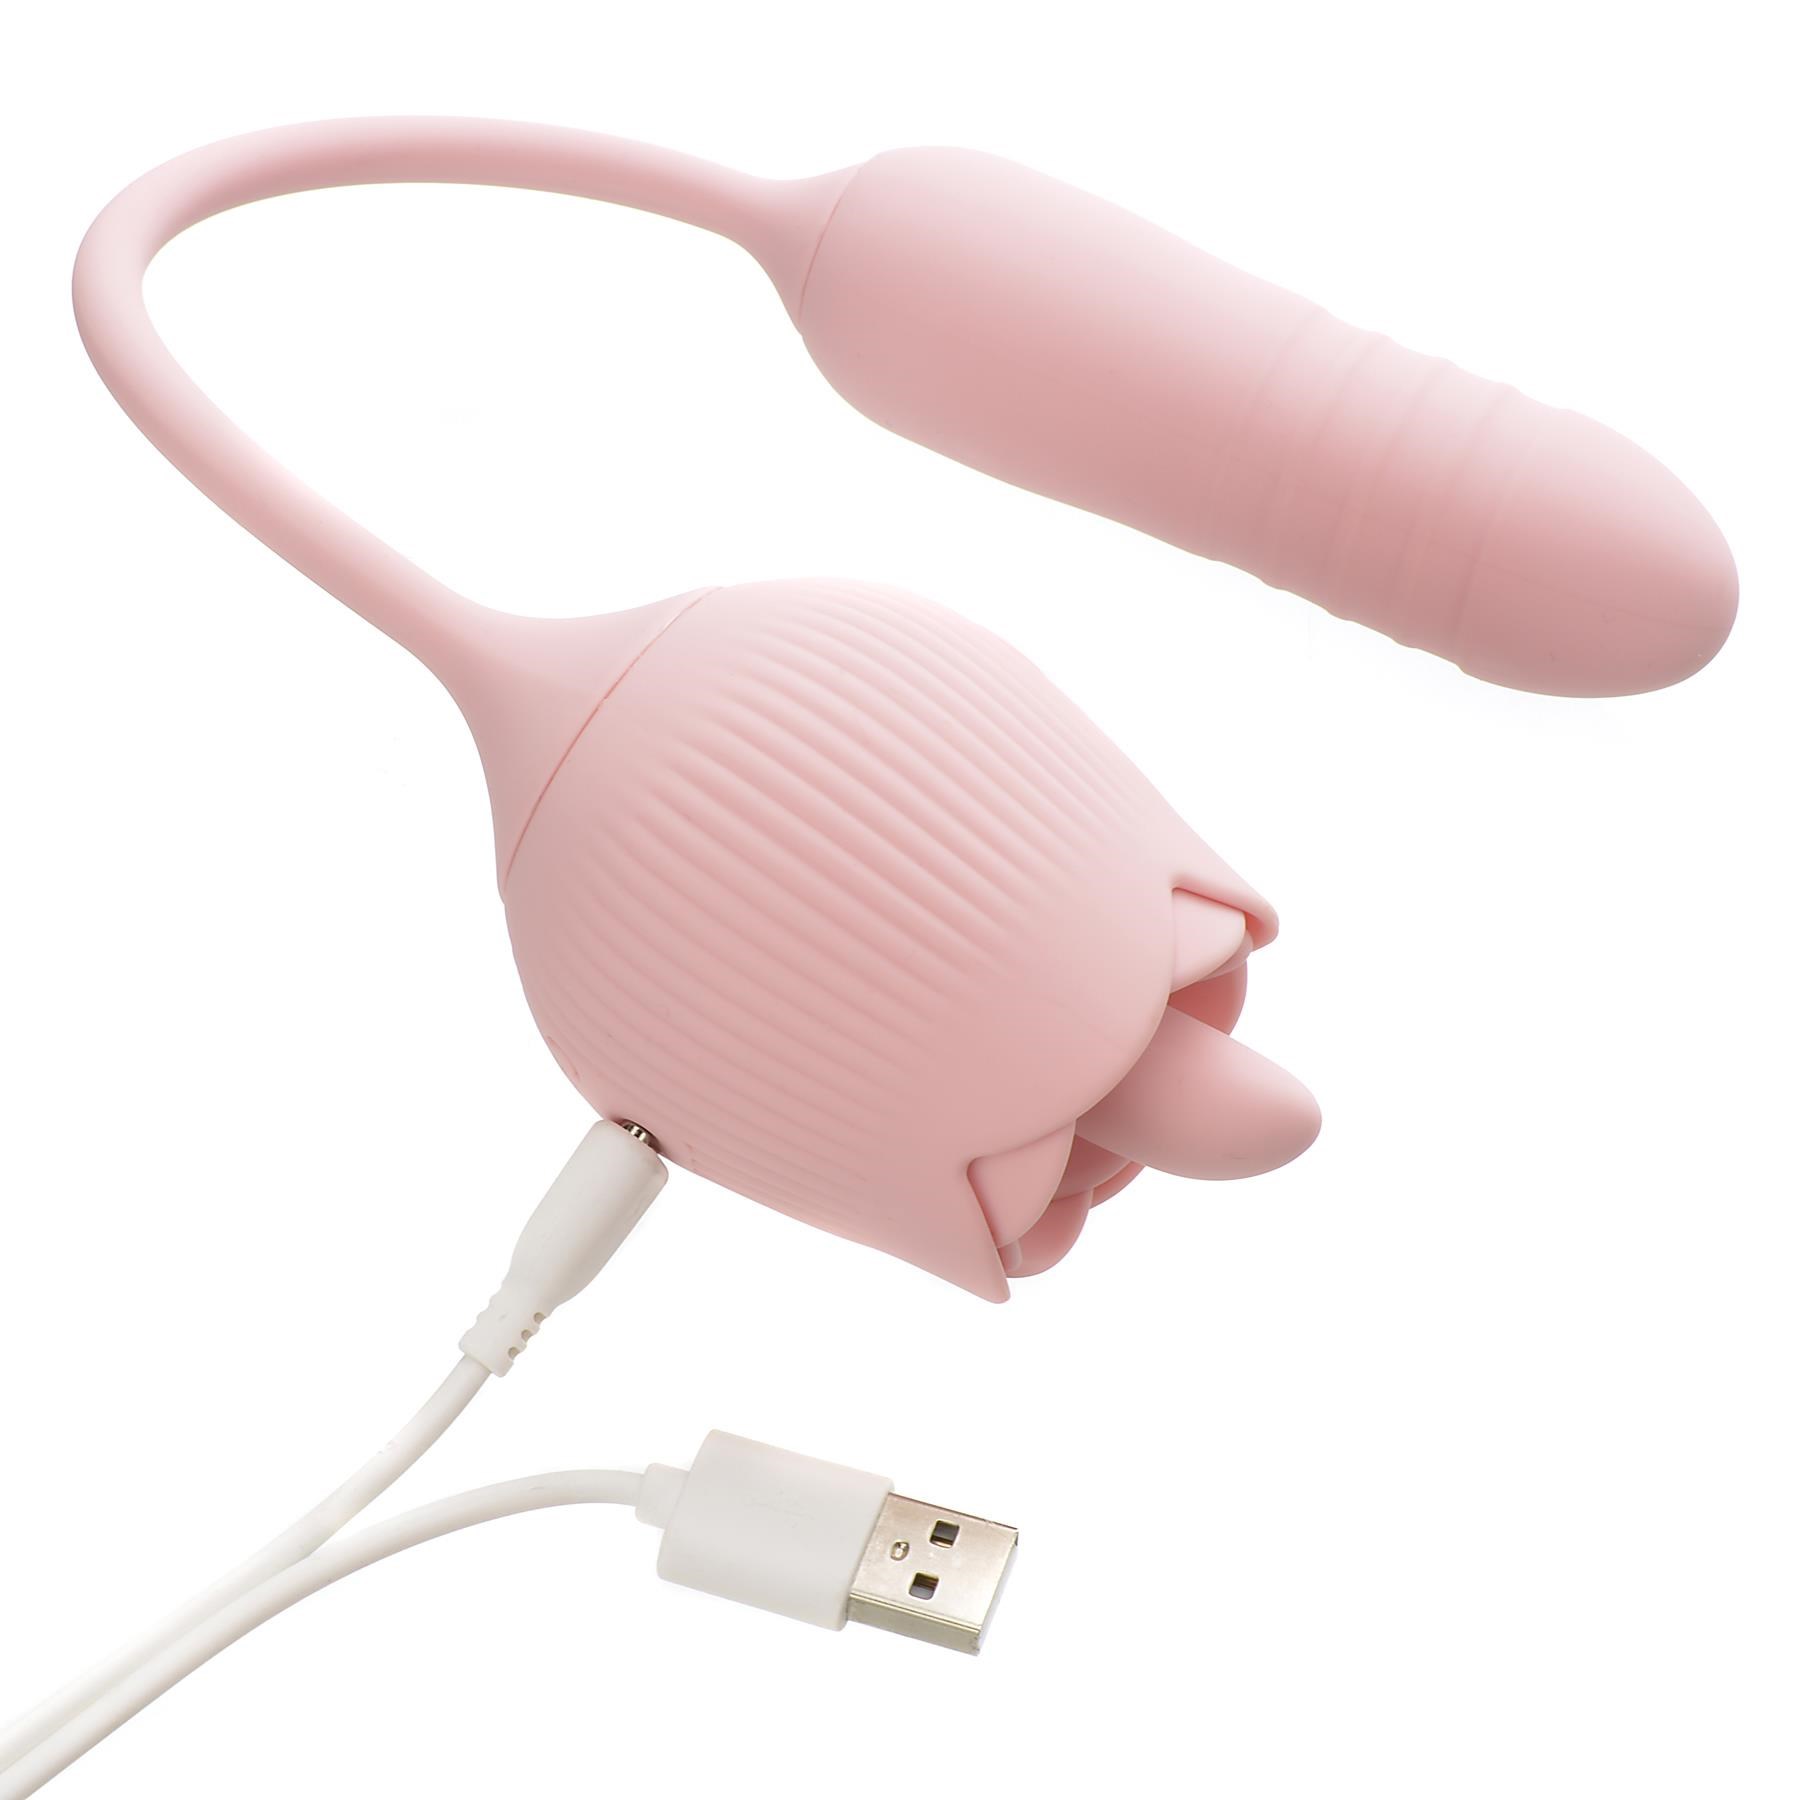 Thrust And Tickle Rose Rechargeable Vibrator - Showing Where Charging Cable is Placed